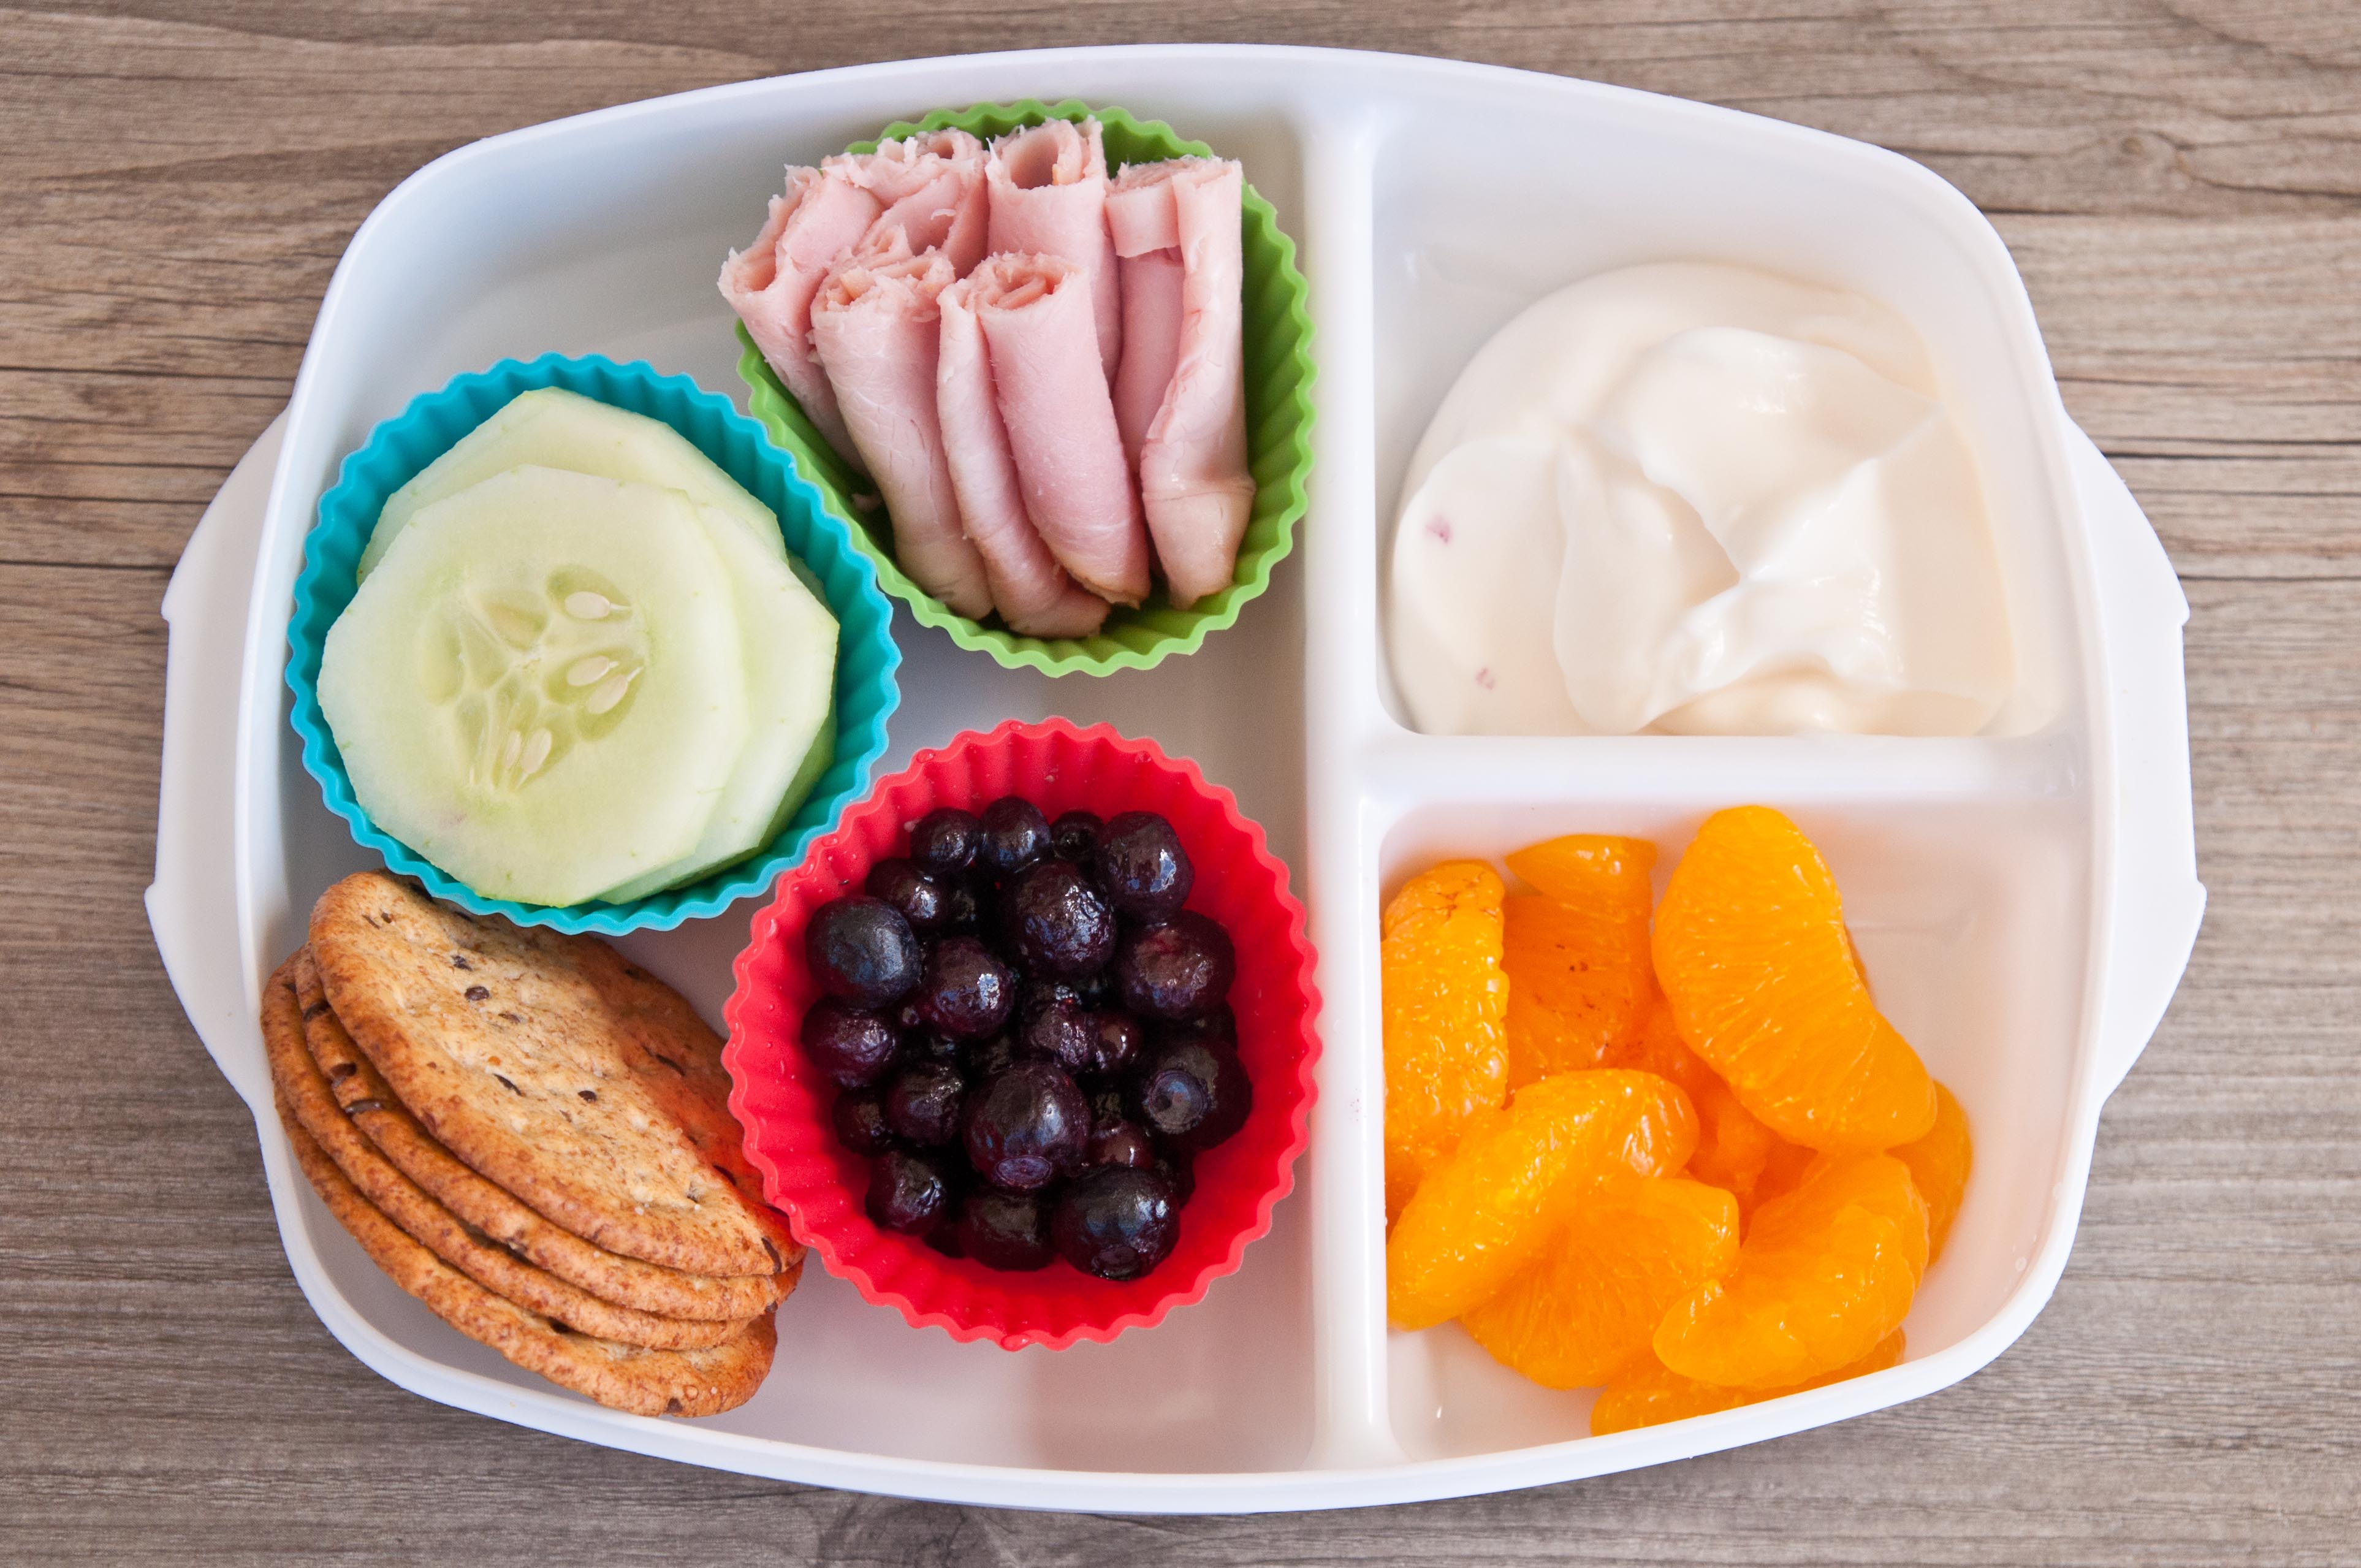 School Lunch Versus Packed Lunch - Interesting Research Tips